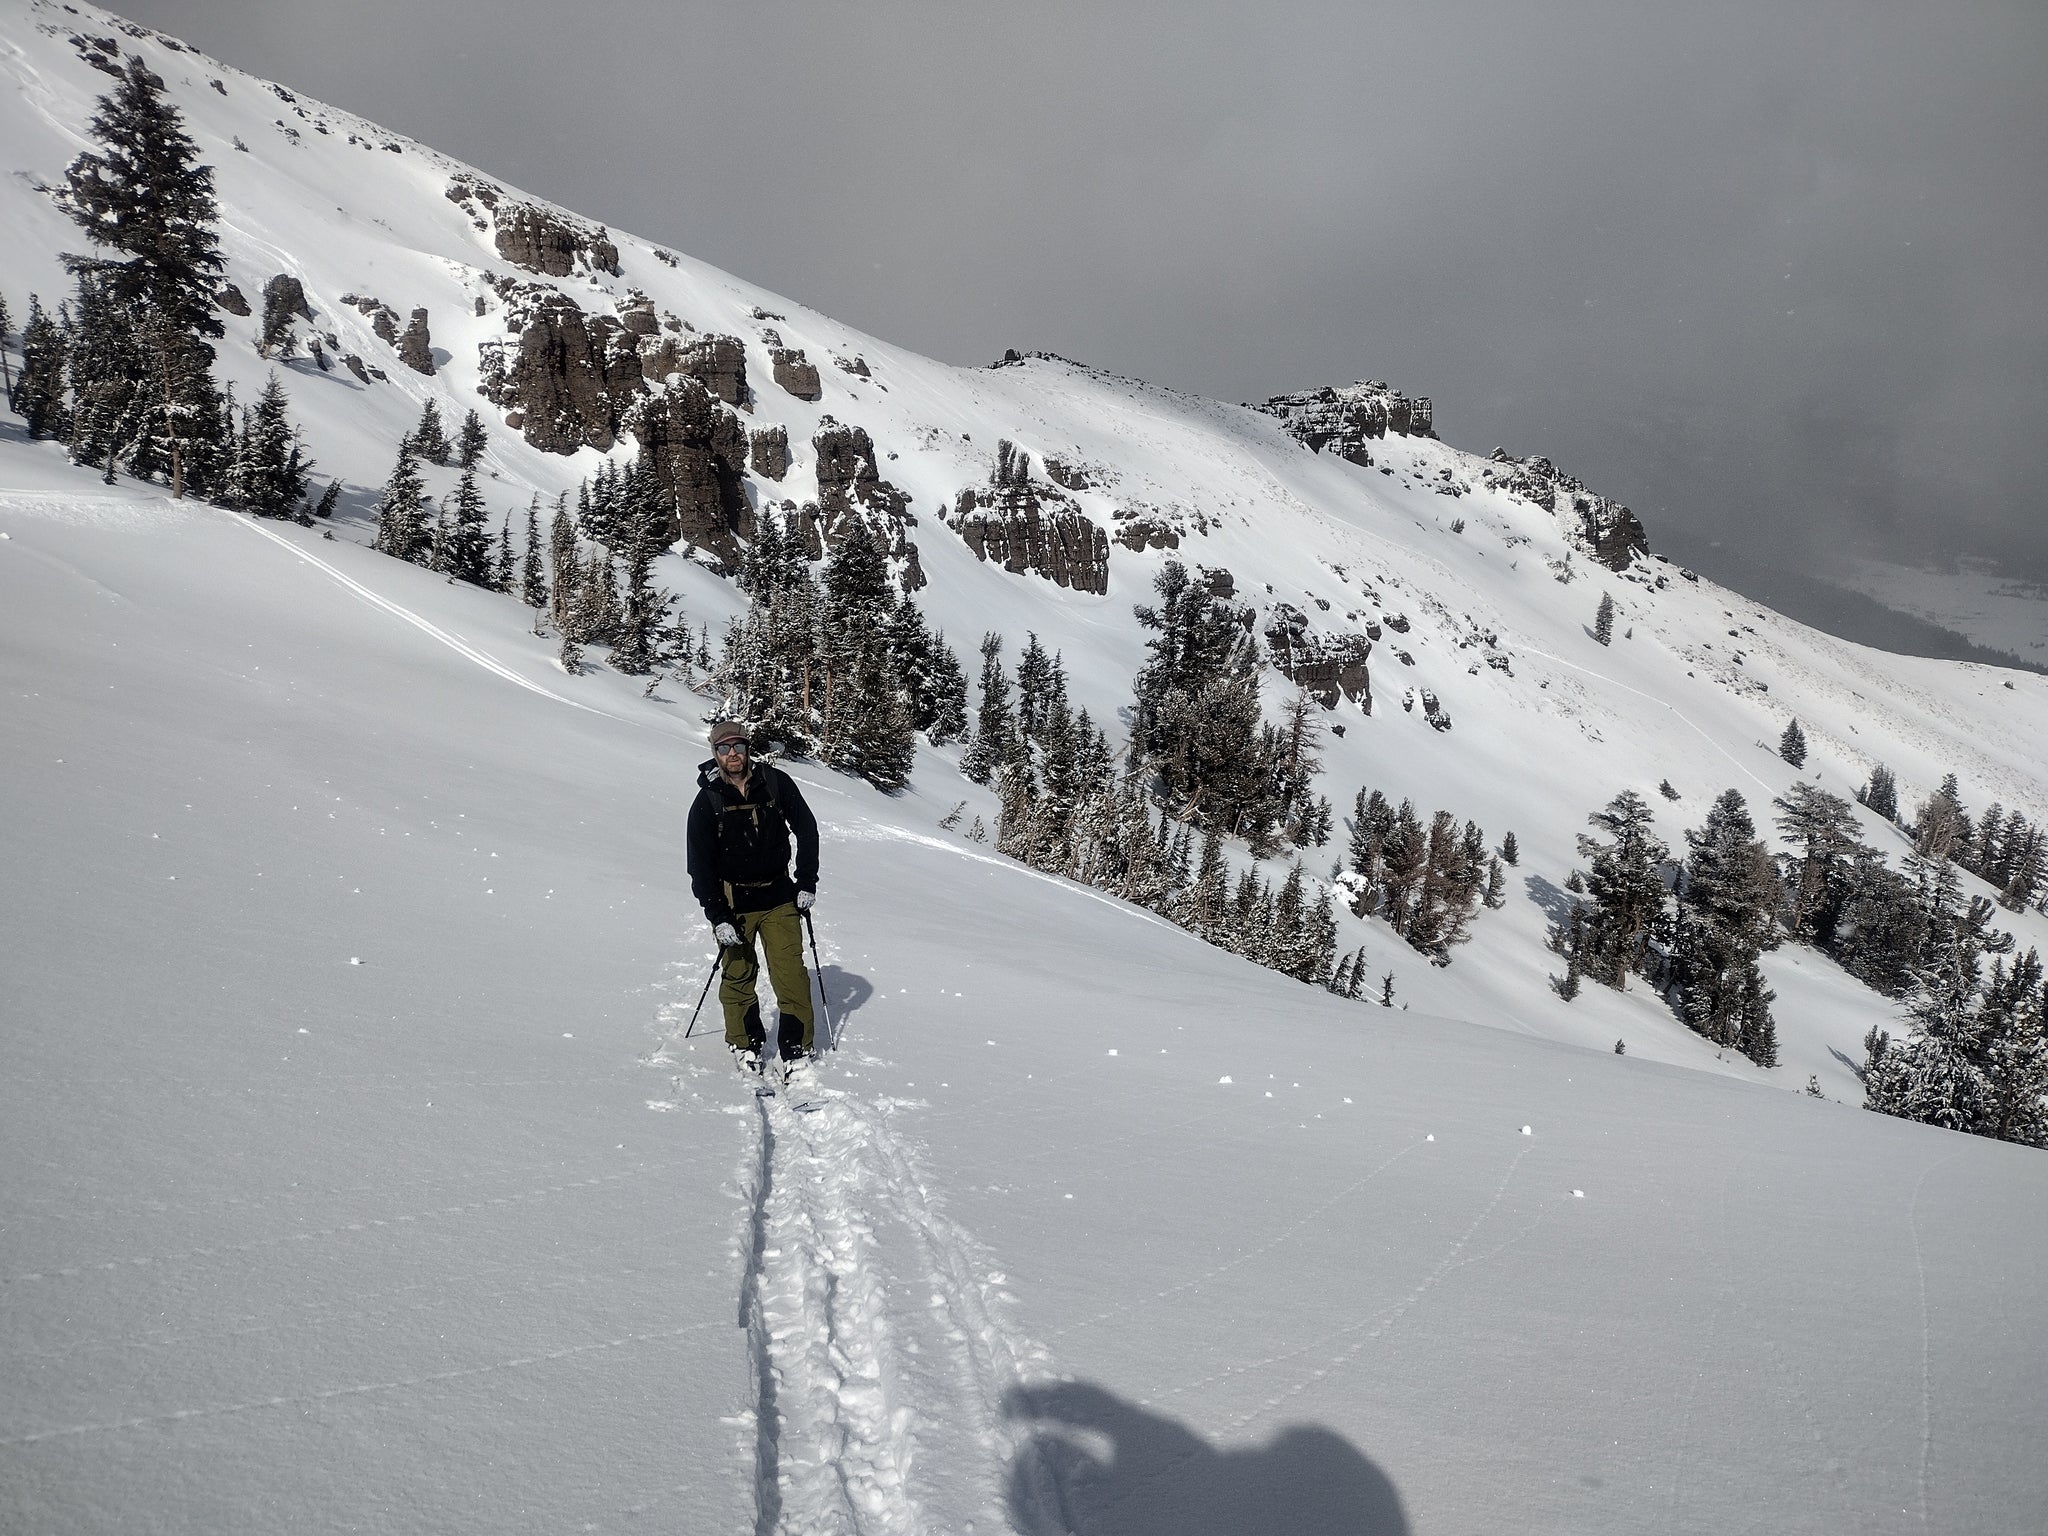 Skinning in the south lake Tahoe backcountry